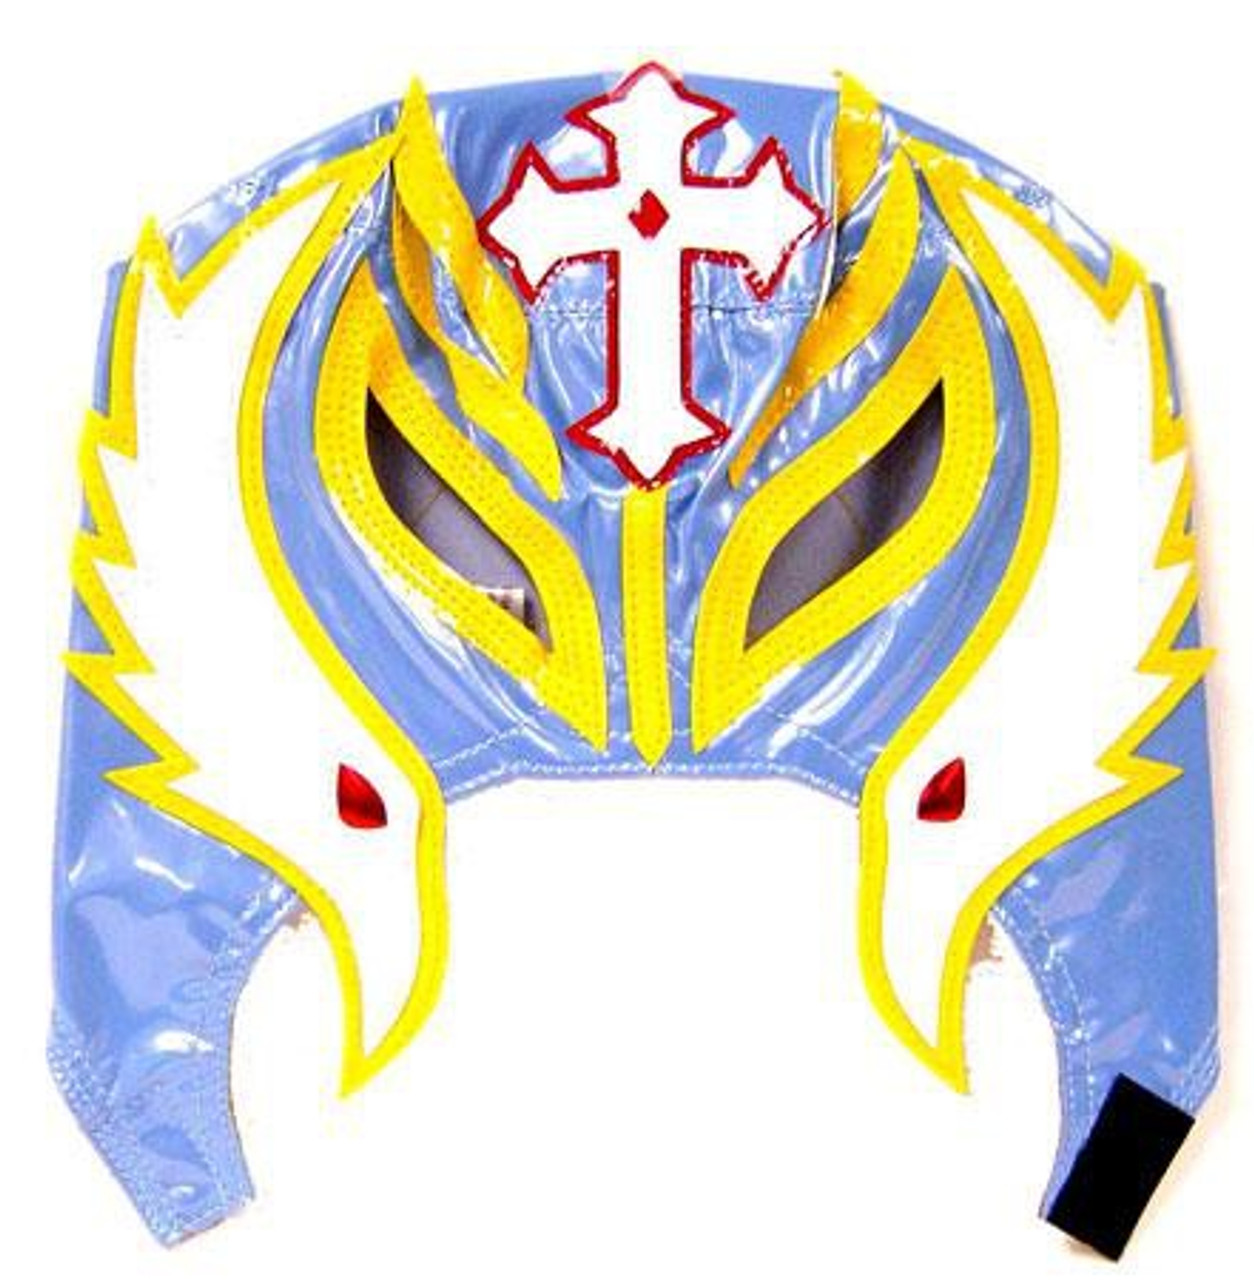 Wwe Wrestling Rey Mysterio Replica Mask Youth Light Blue Yellow Figures Toy Co Toywiz